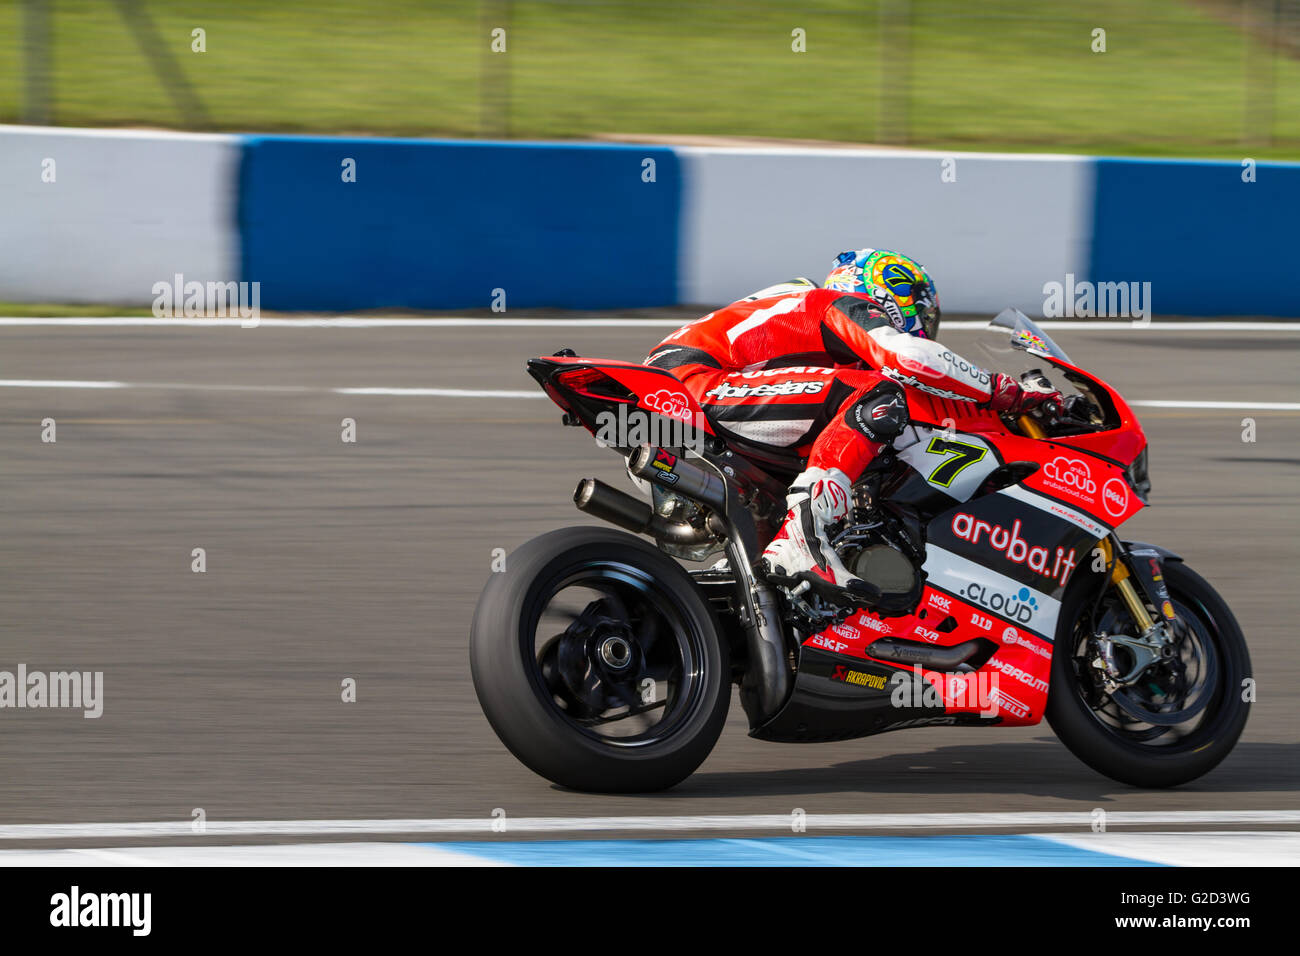 Donington Park, Derby, UK. 28th May, 2016. World Superbikes Acerbis UK Round 7 at Donington Park. Donington Park, Derby, UK. Saturday 28th May, 2016. #7 Chaz Davies (GBR)- Team Aruba.IT racing - DUCATI, who was second quickest in the Tissot-Superpole 2 Credit:  steven roe/Alamy Live News Stock Photo